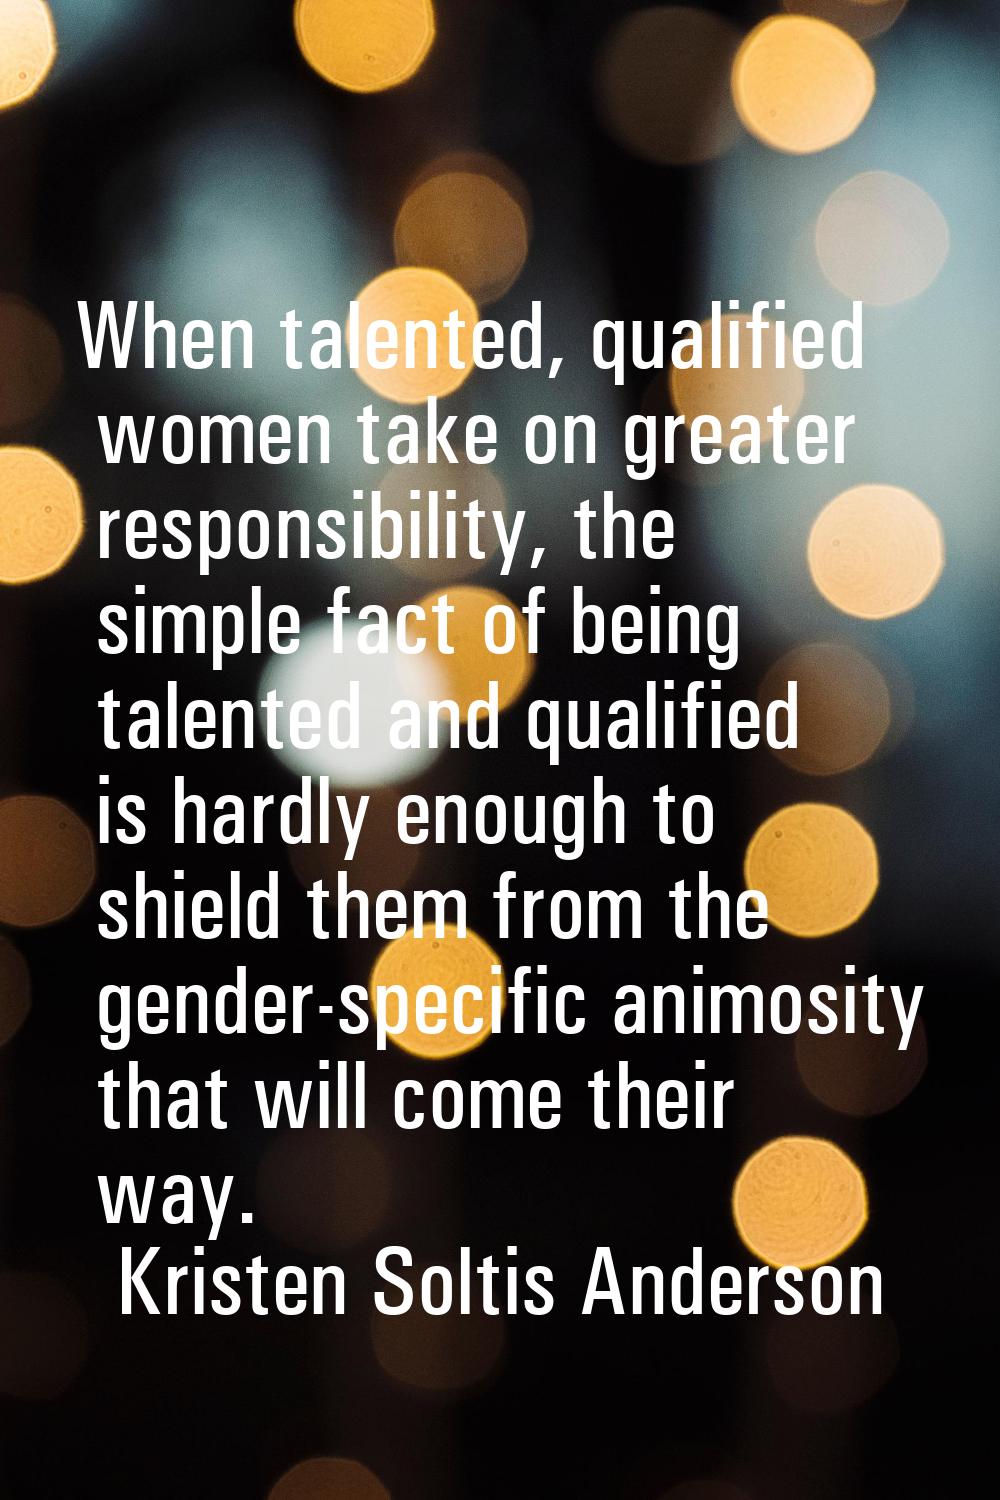 When talented, qualified women take on greater responsibility, the simple fact of being talented an